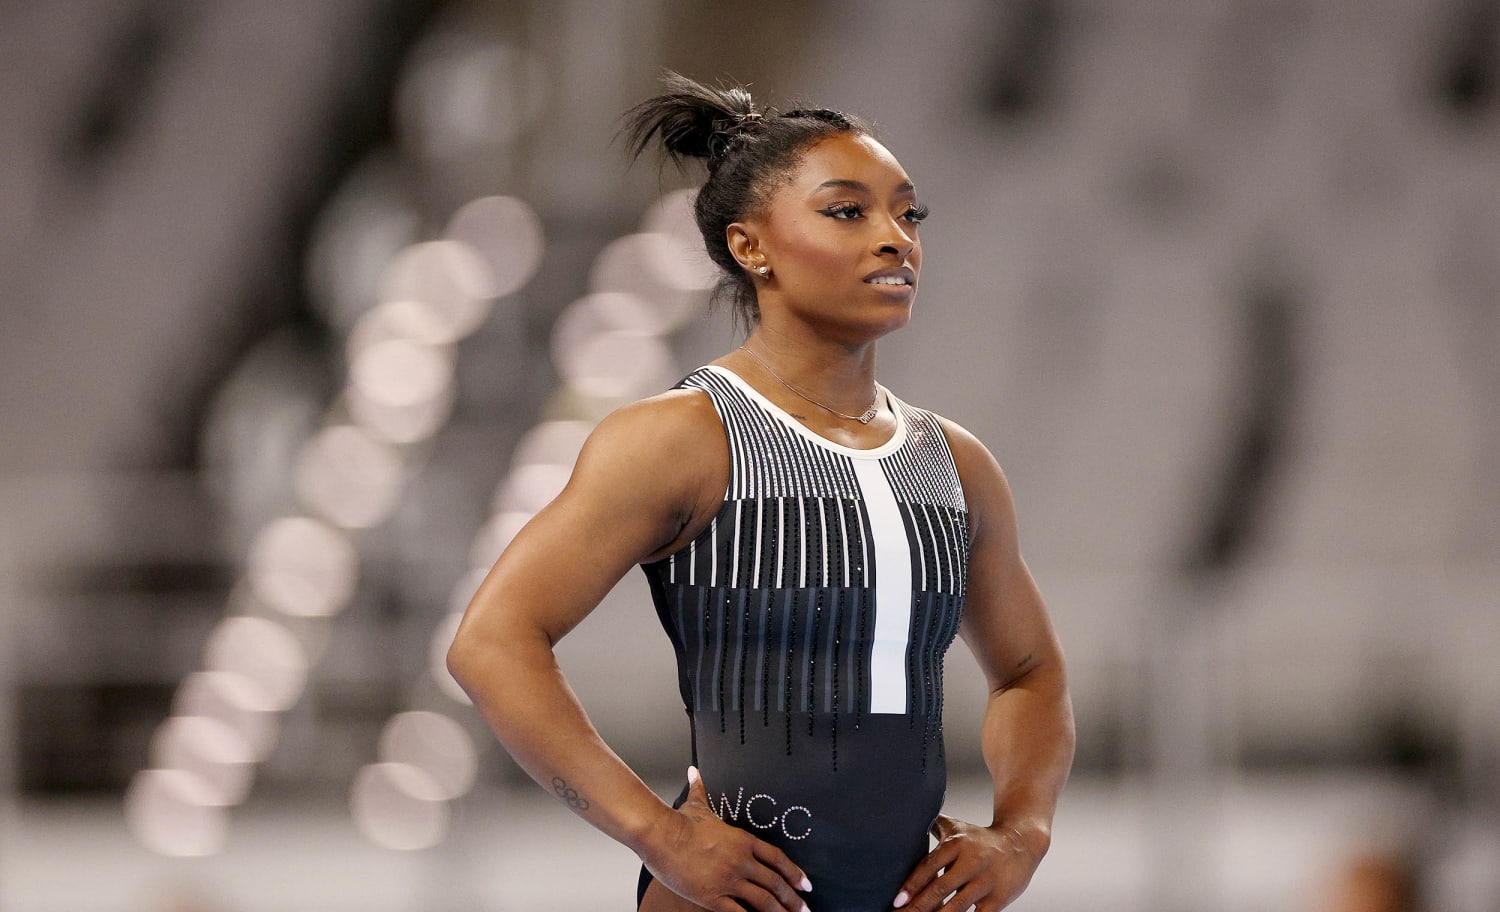 'The important thing' Simone Biles' mom wants her daughter to know before the Paris Olympics